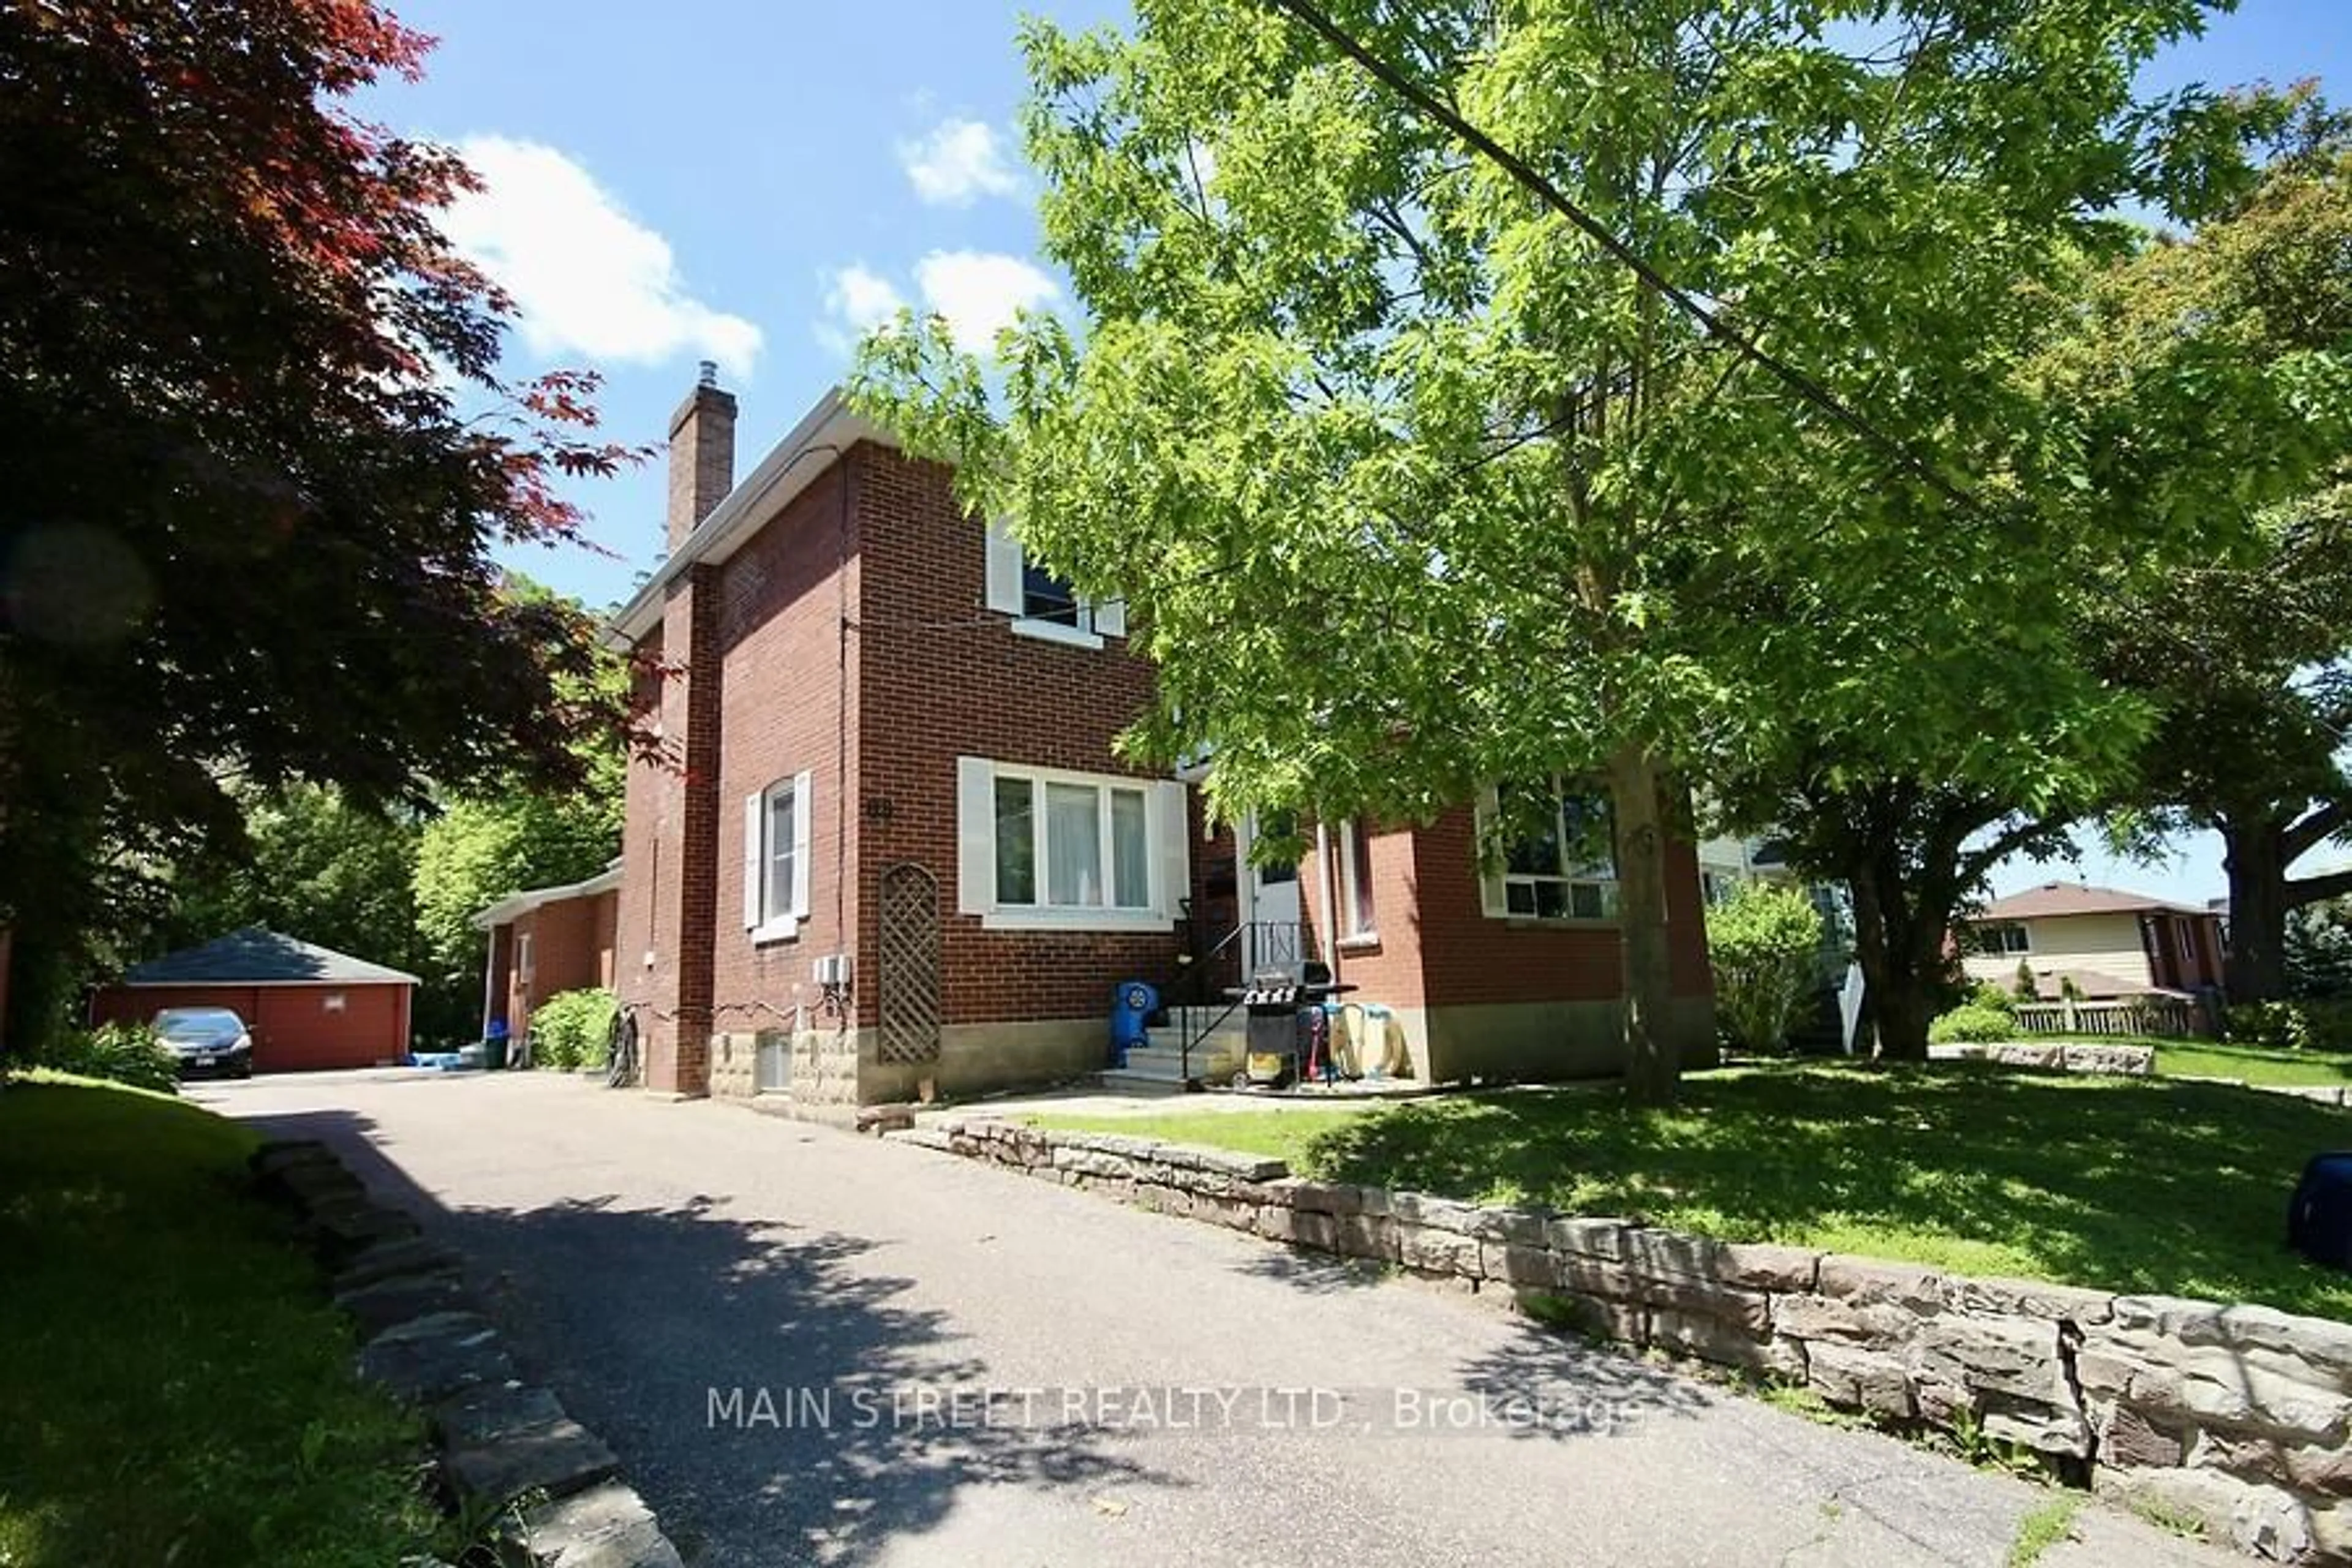 Home with brick exterior material for 88 Spruce St, Aurora Ontario L4G 1S1